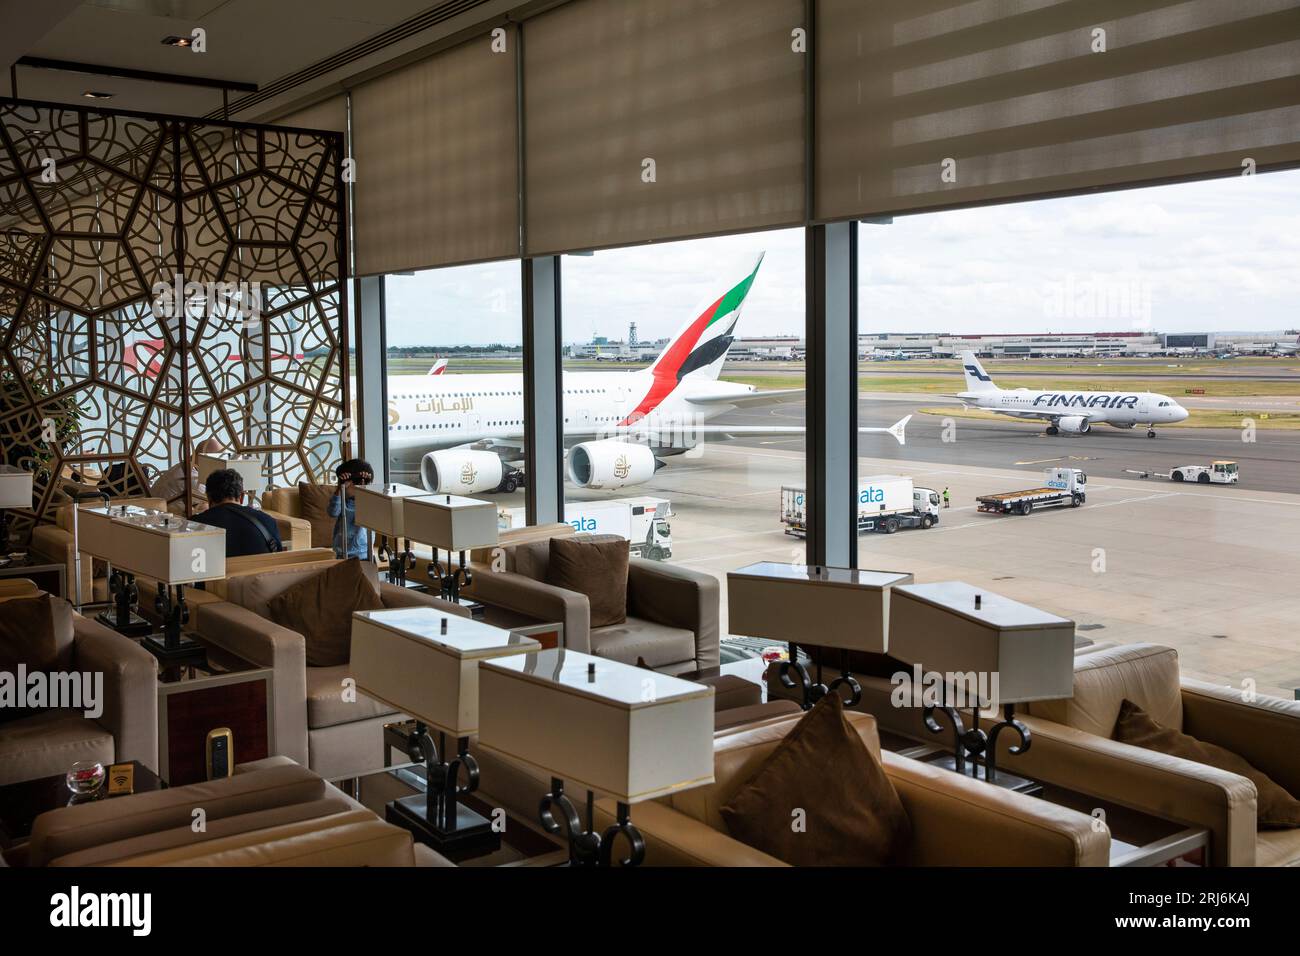 UK, England, London Heathrow Airport, Emirates Business Class Lounge, seating overlooking A380 at gate Stock Photo